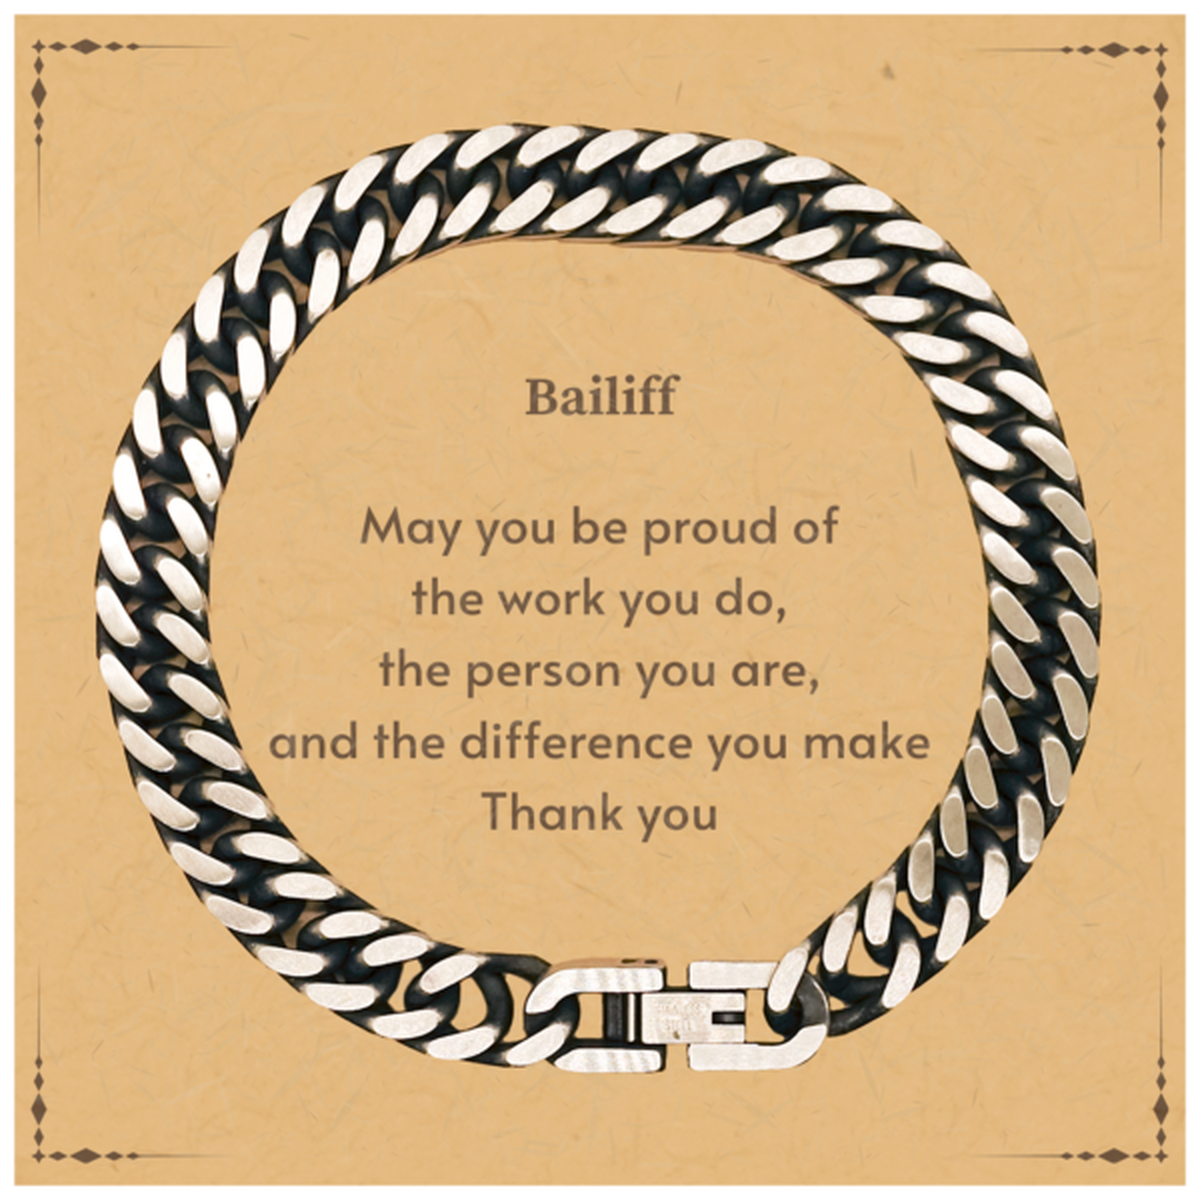 Heartwarming Cuban Link Chain Bracelet Retirement Coworkers Gifts for Bailiff, Bailiff May You be proud of the work you do, the person you are Gifts for Boss Men Women Friends